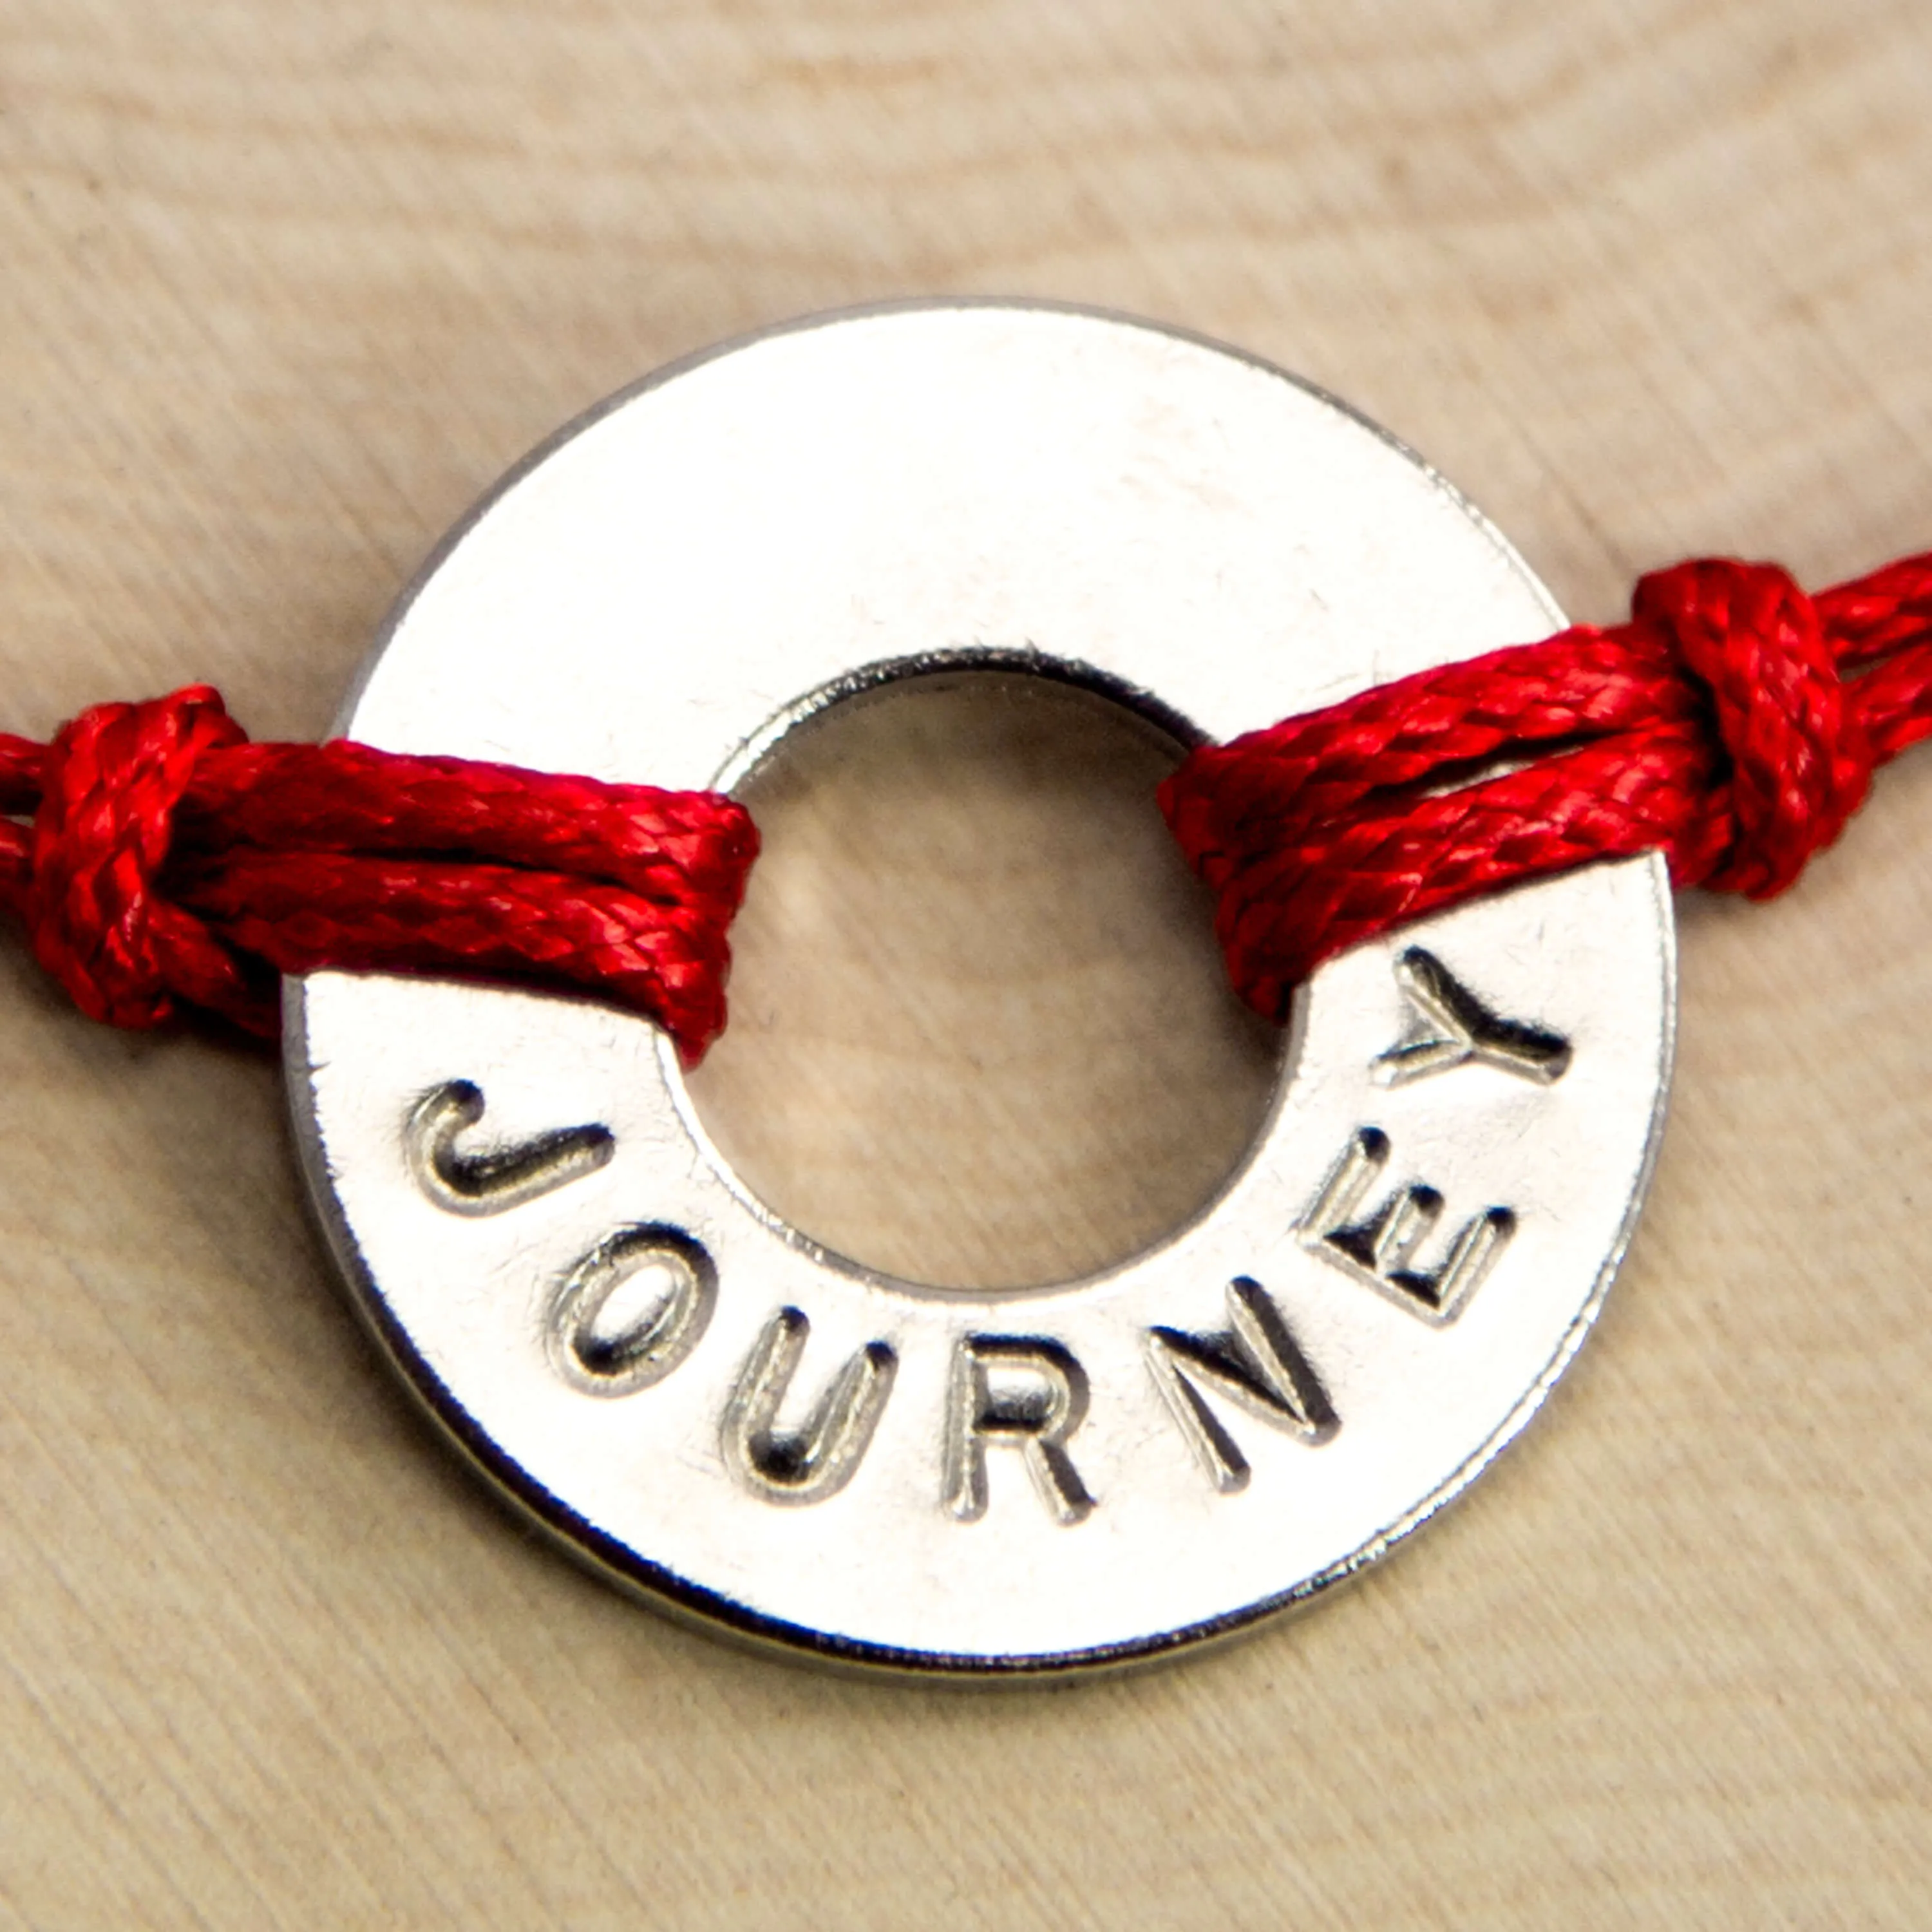 Washer with word "JOURNEY" imprinted with red rope